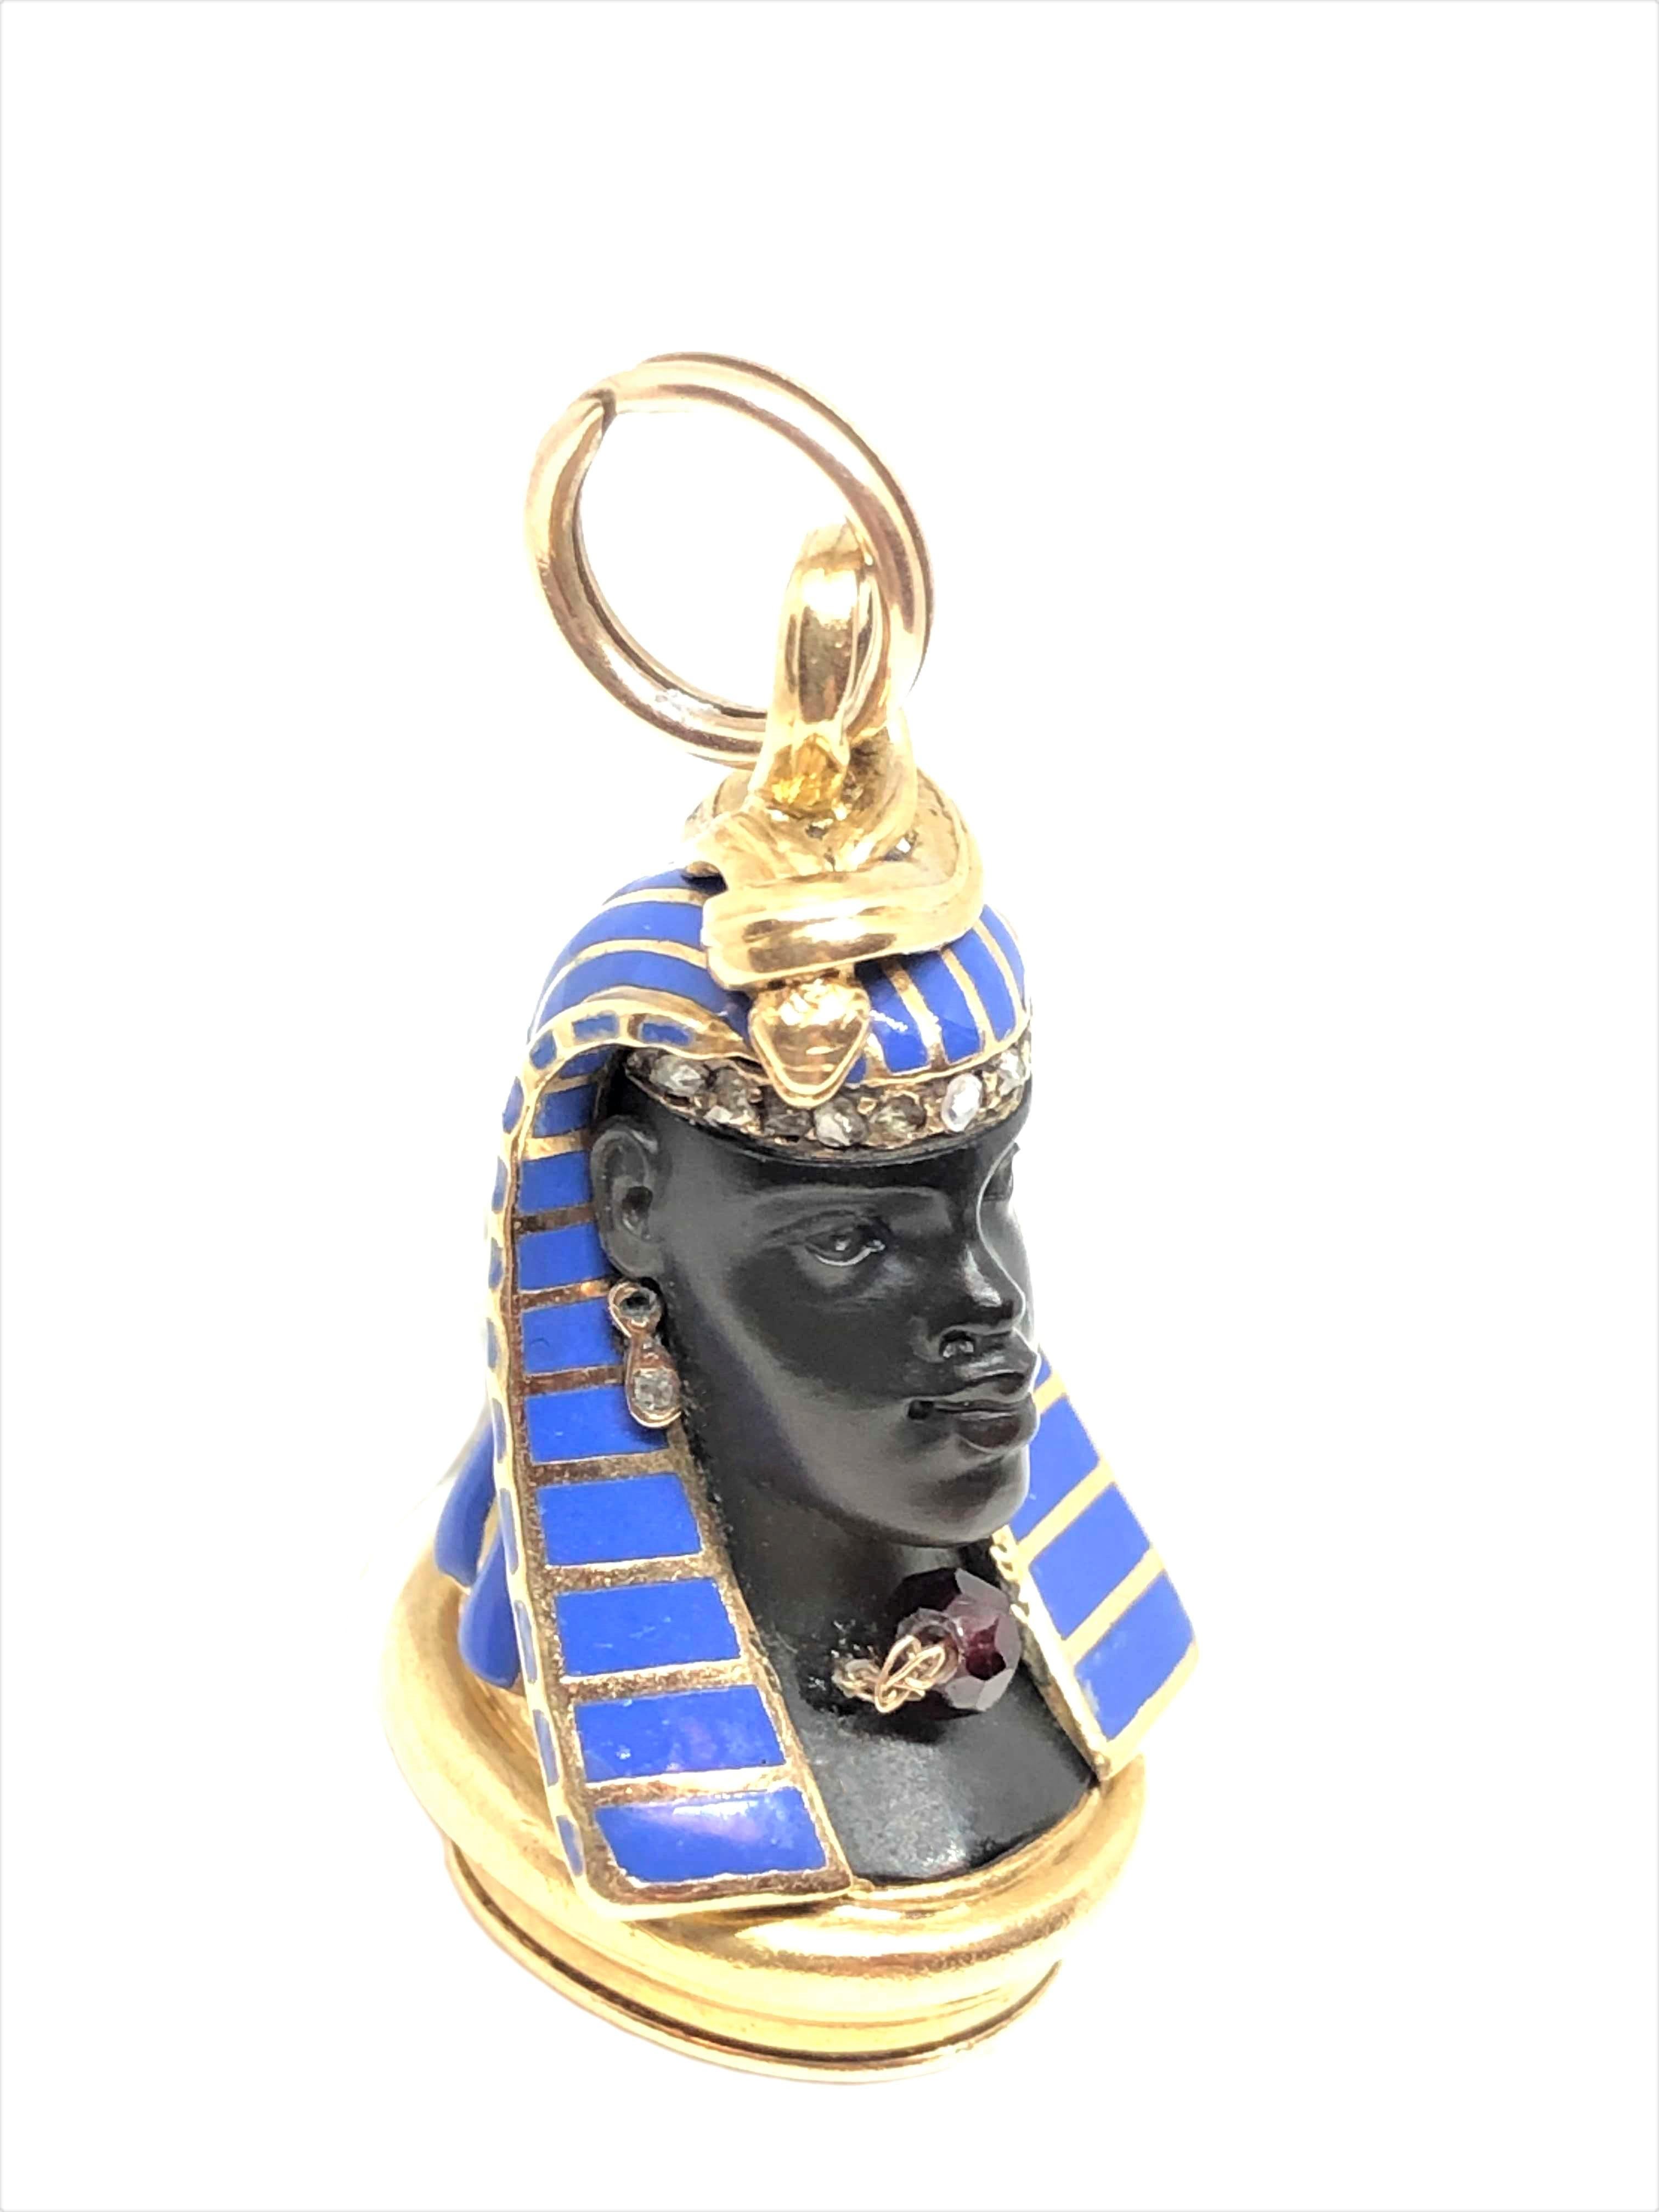 Circa 1900 14K Yellow Gold Egyptian Revival Seal Fob, measuring 1 1/4 inch in length, very nicely detailed with a carved face of Onyx, Enamel, Rose cut Diamonds and a Garnet. The Bottom is a carved Hard stone Agate Seal Fob with the letter P.